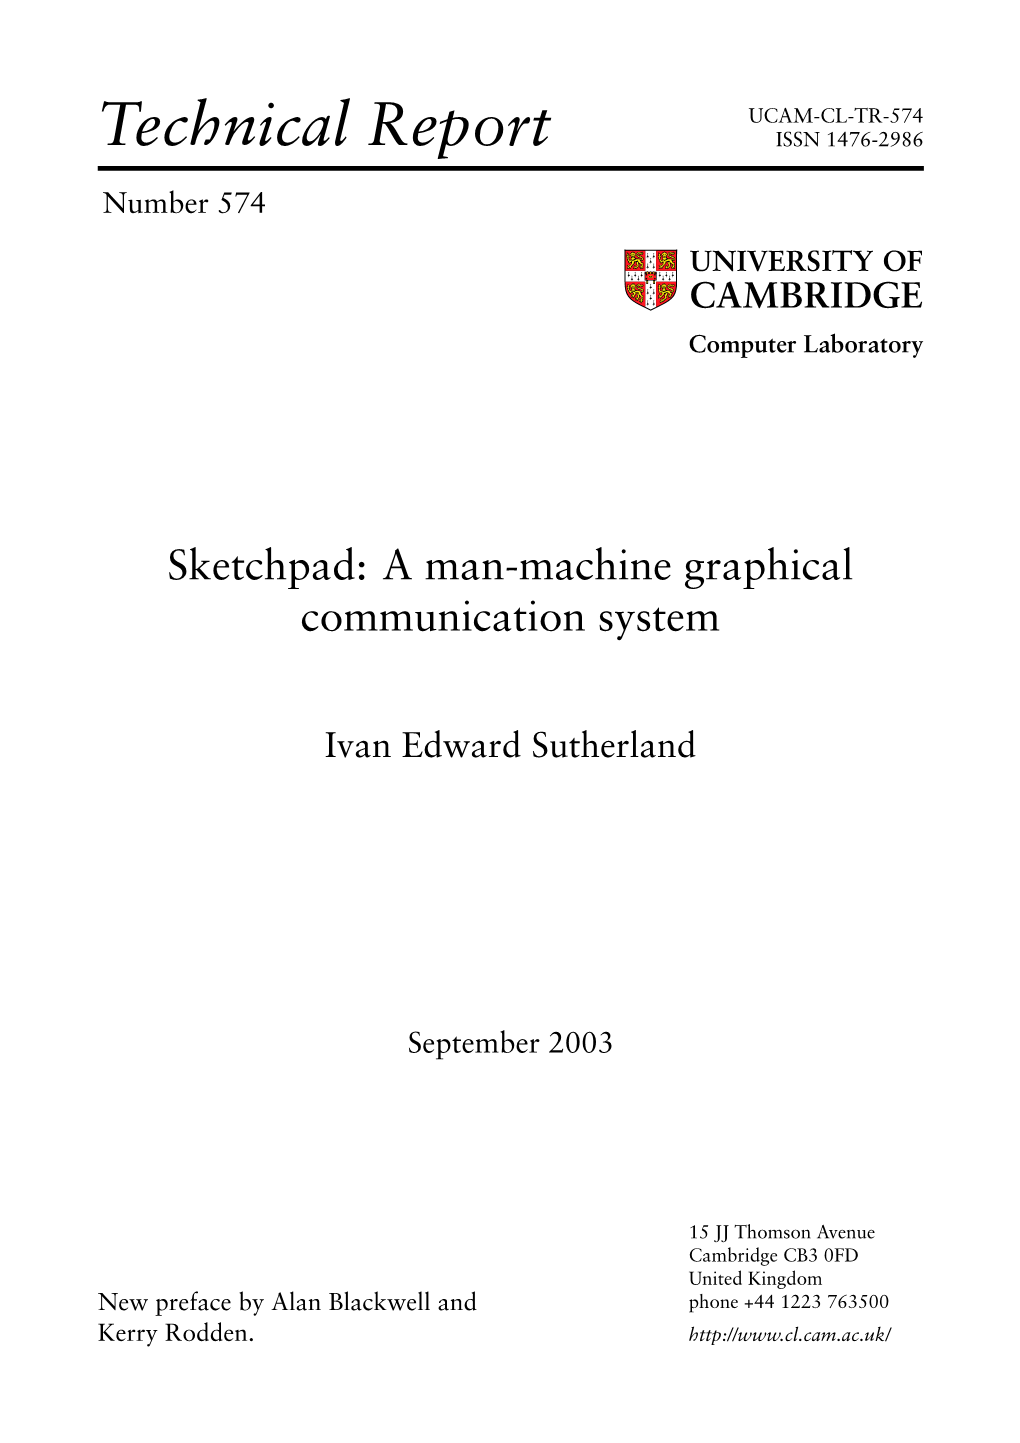 Sketchpad: a Man-Machine Graphical Communication System